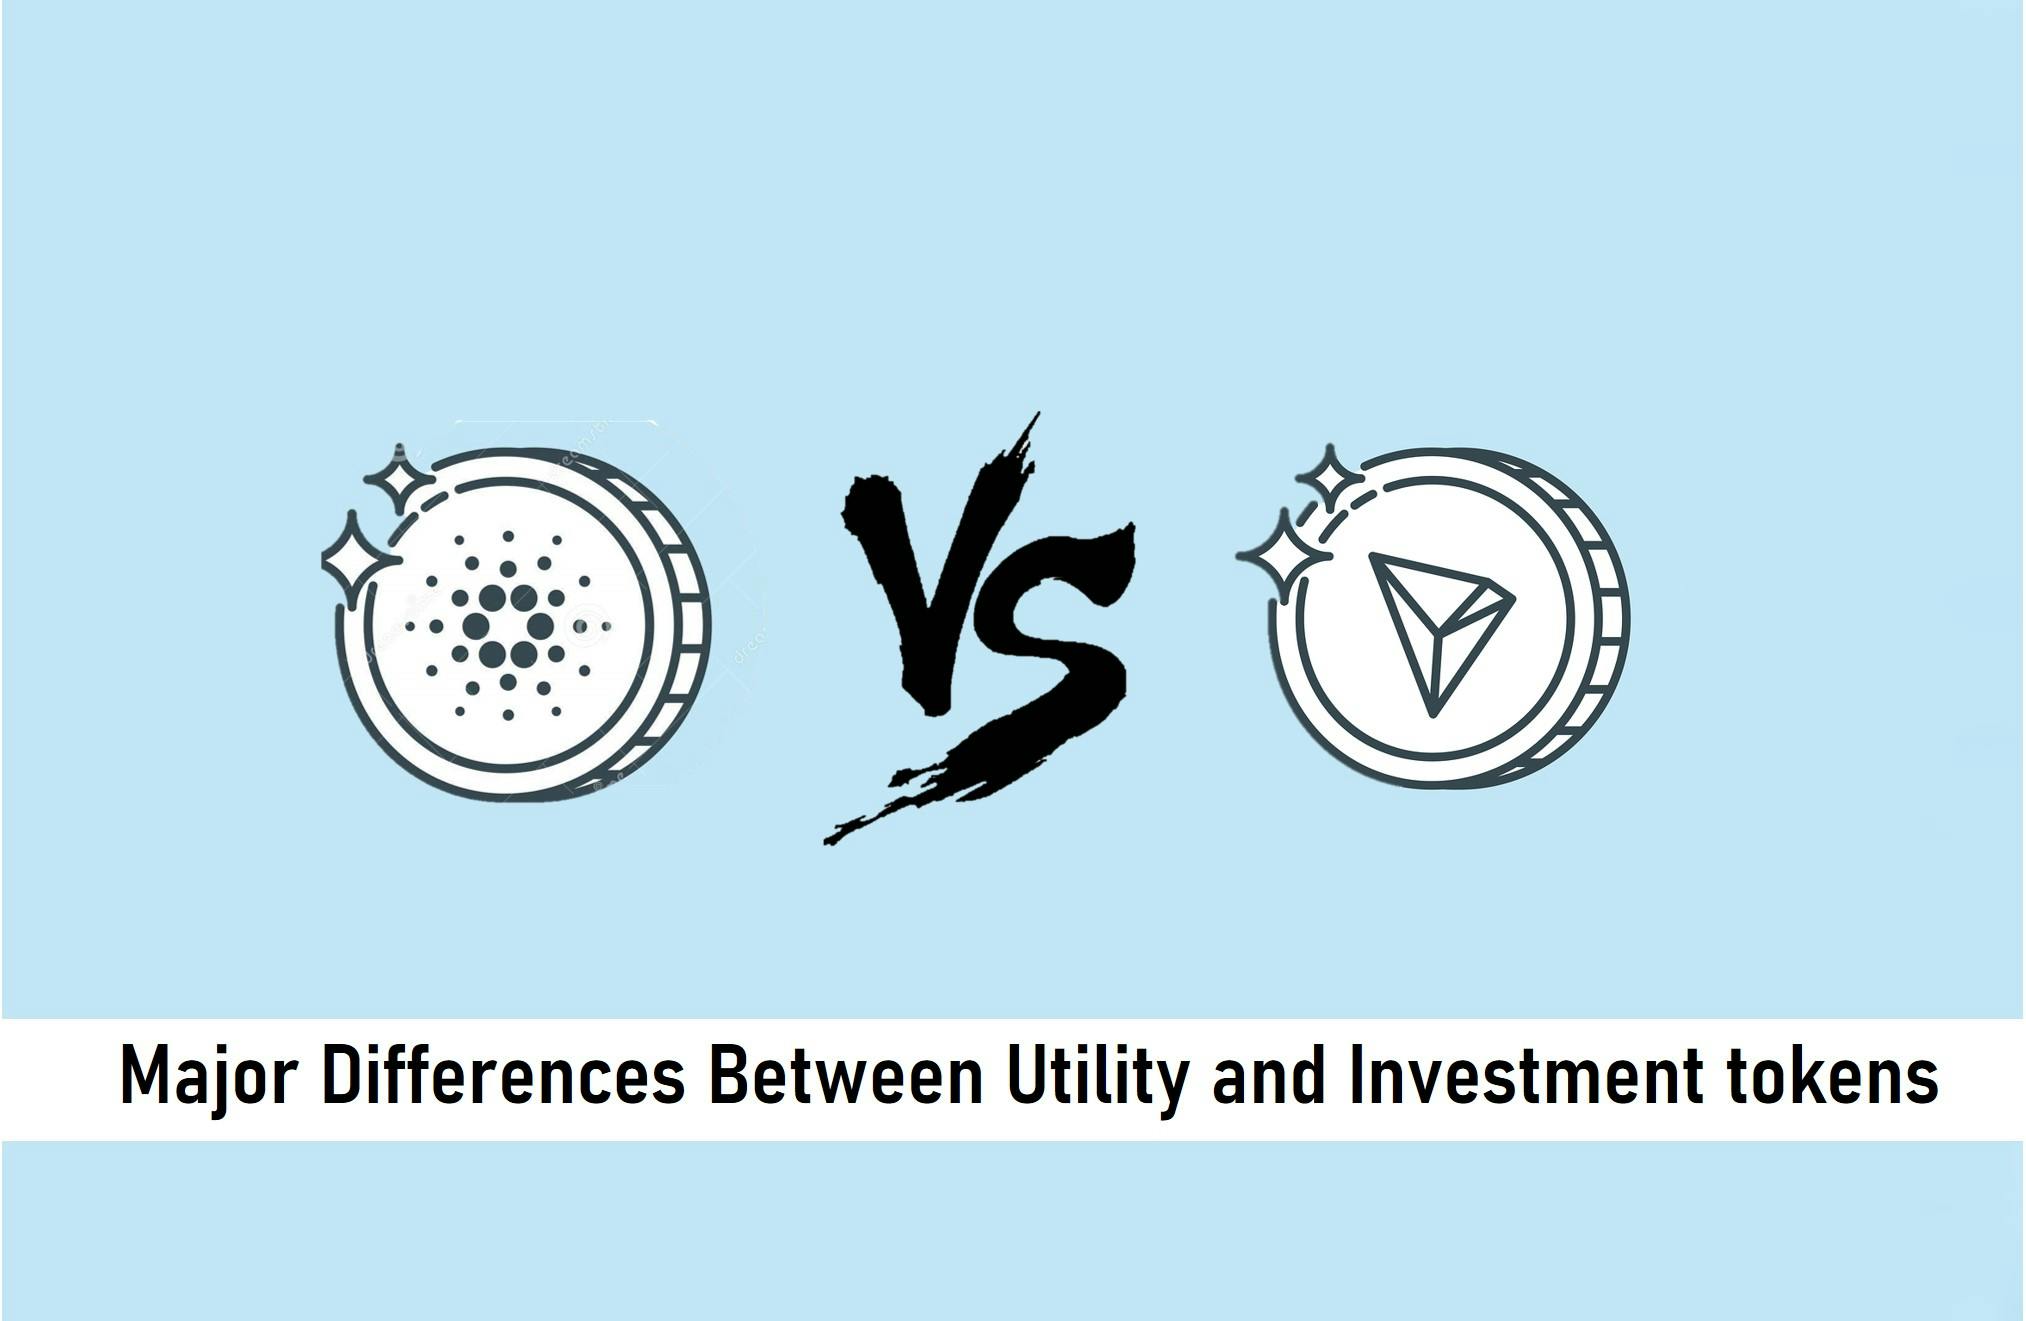 Major Differences Between Utility and Investment Tokens